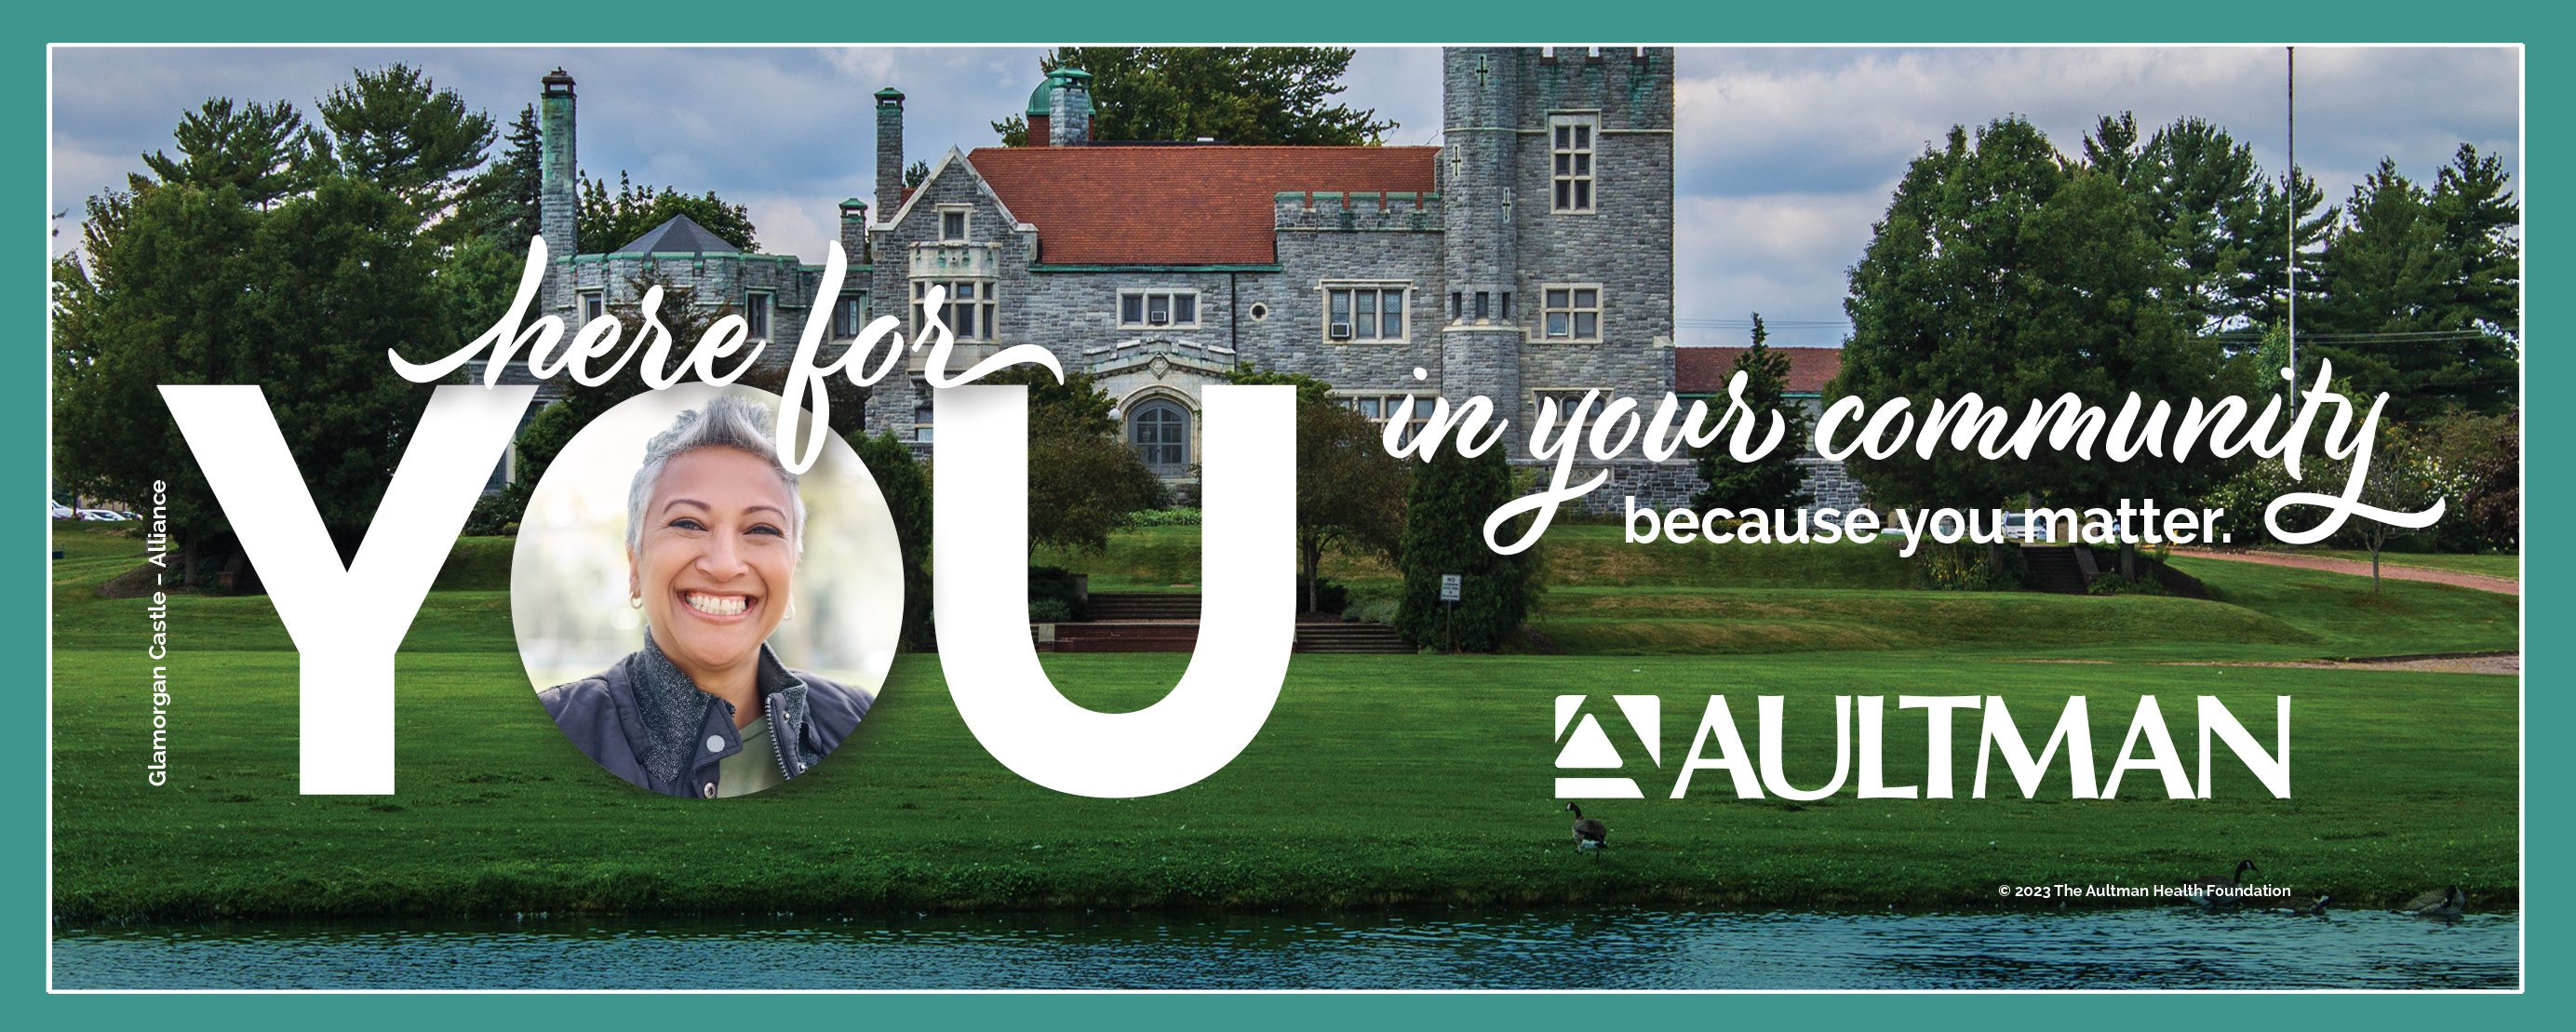 Aultman Alliance here for you in your community because you matter